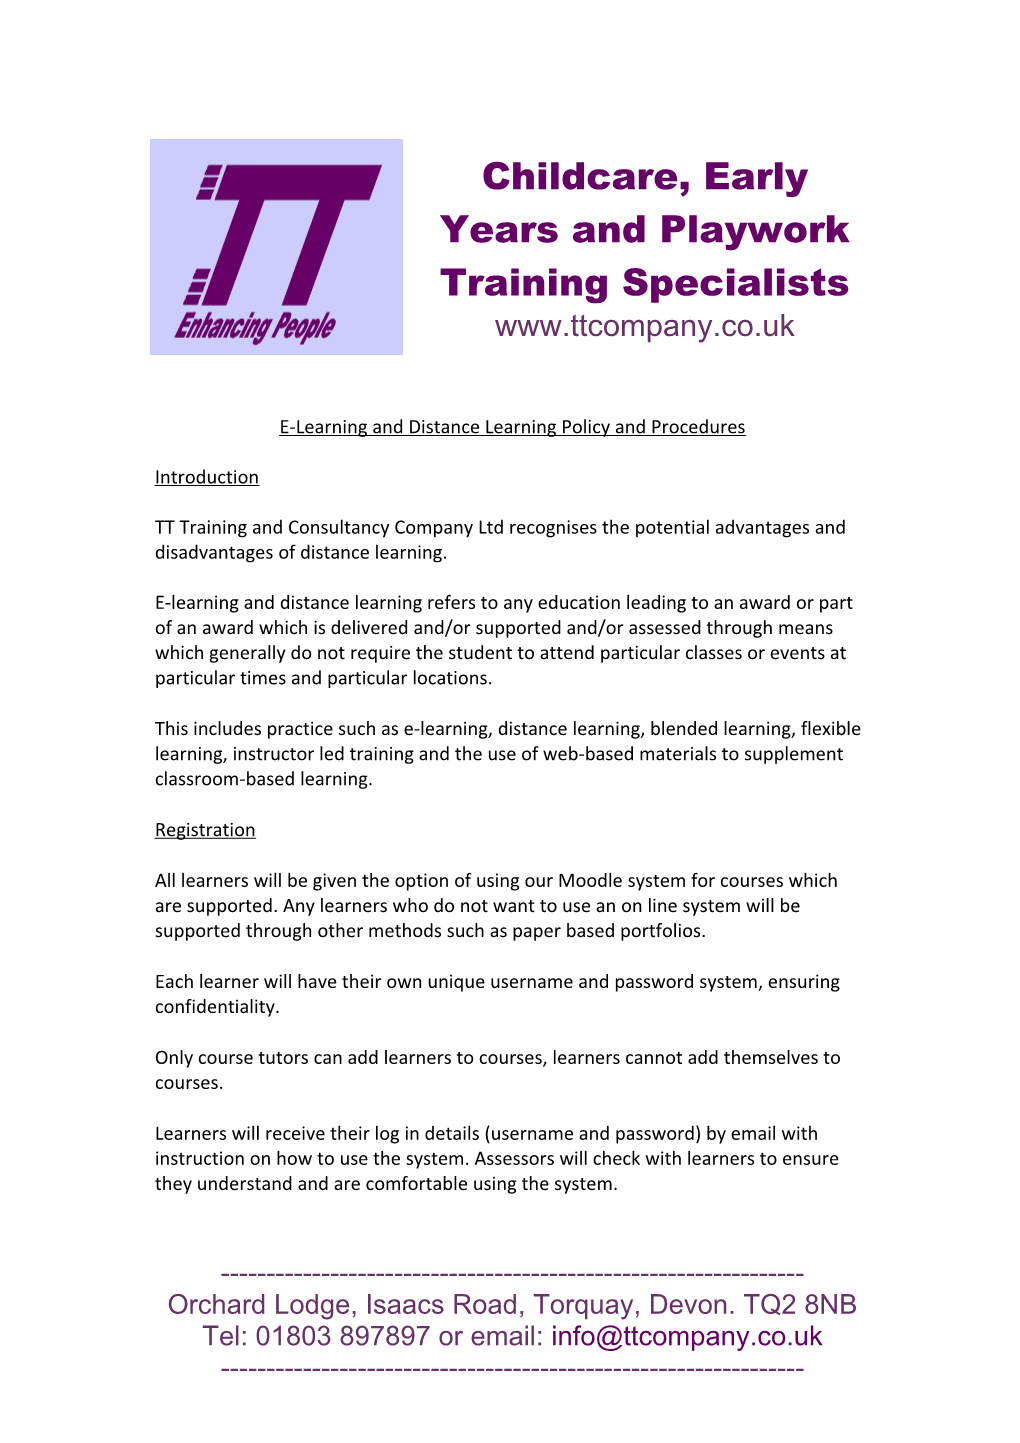 Childcare, Early Years and Playwork Training Specialists